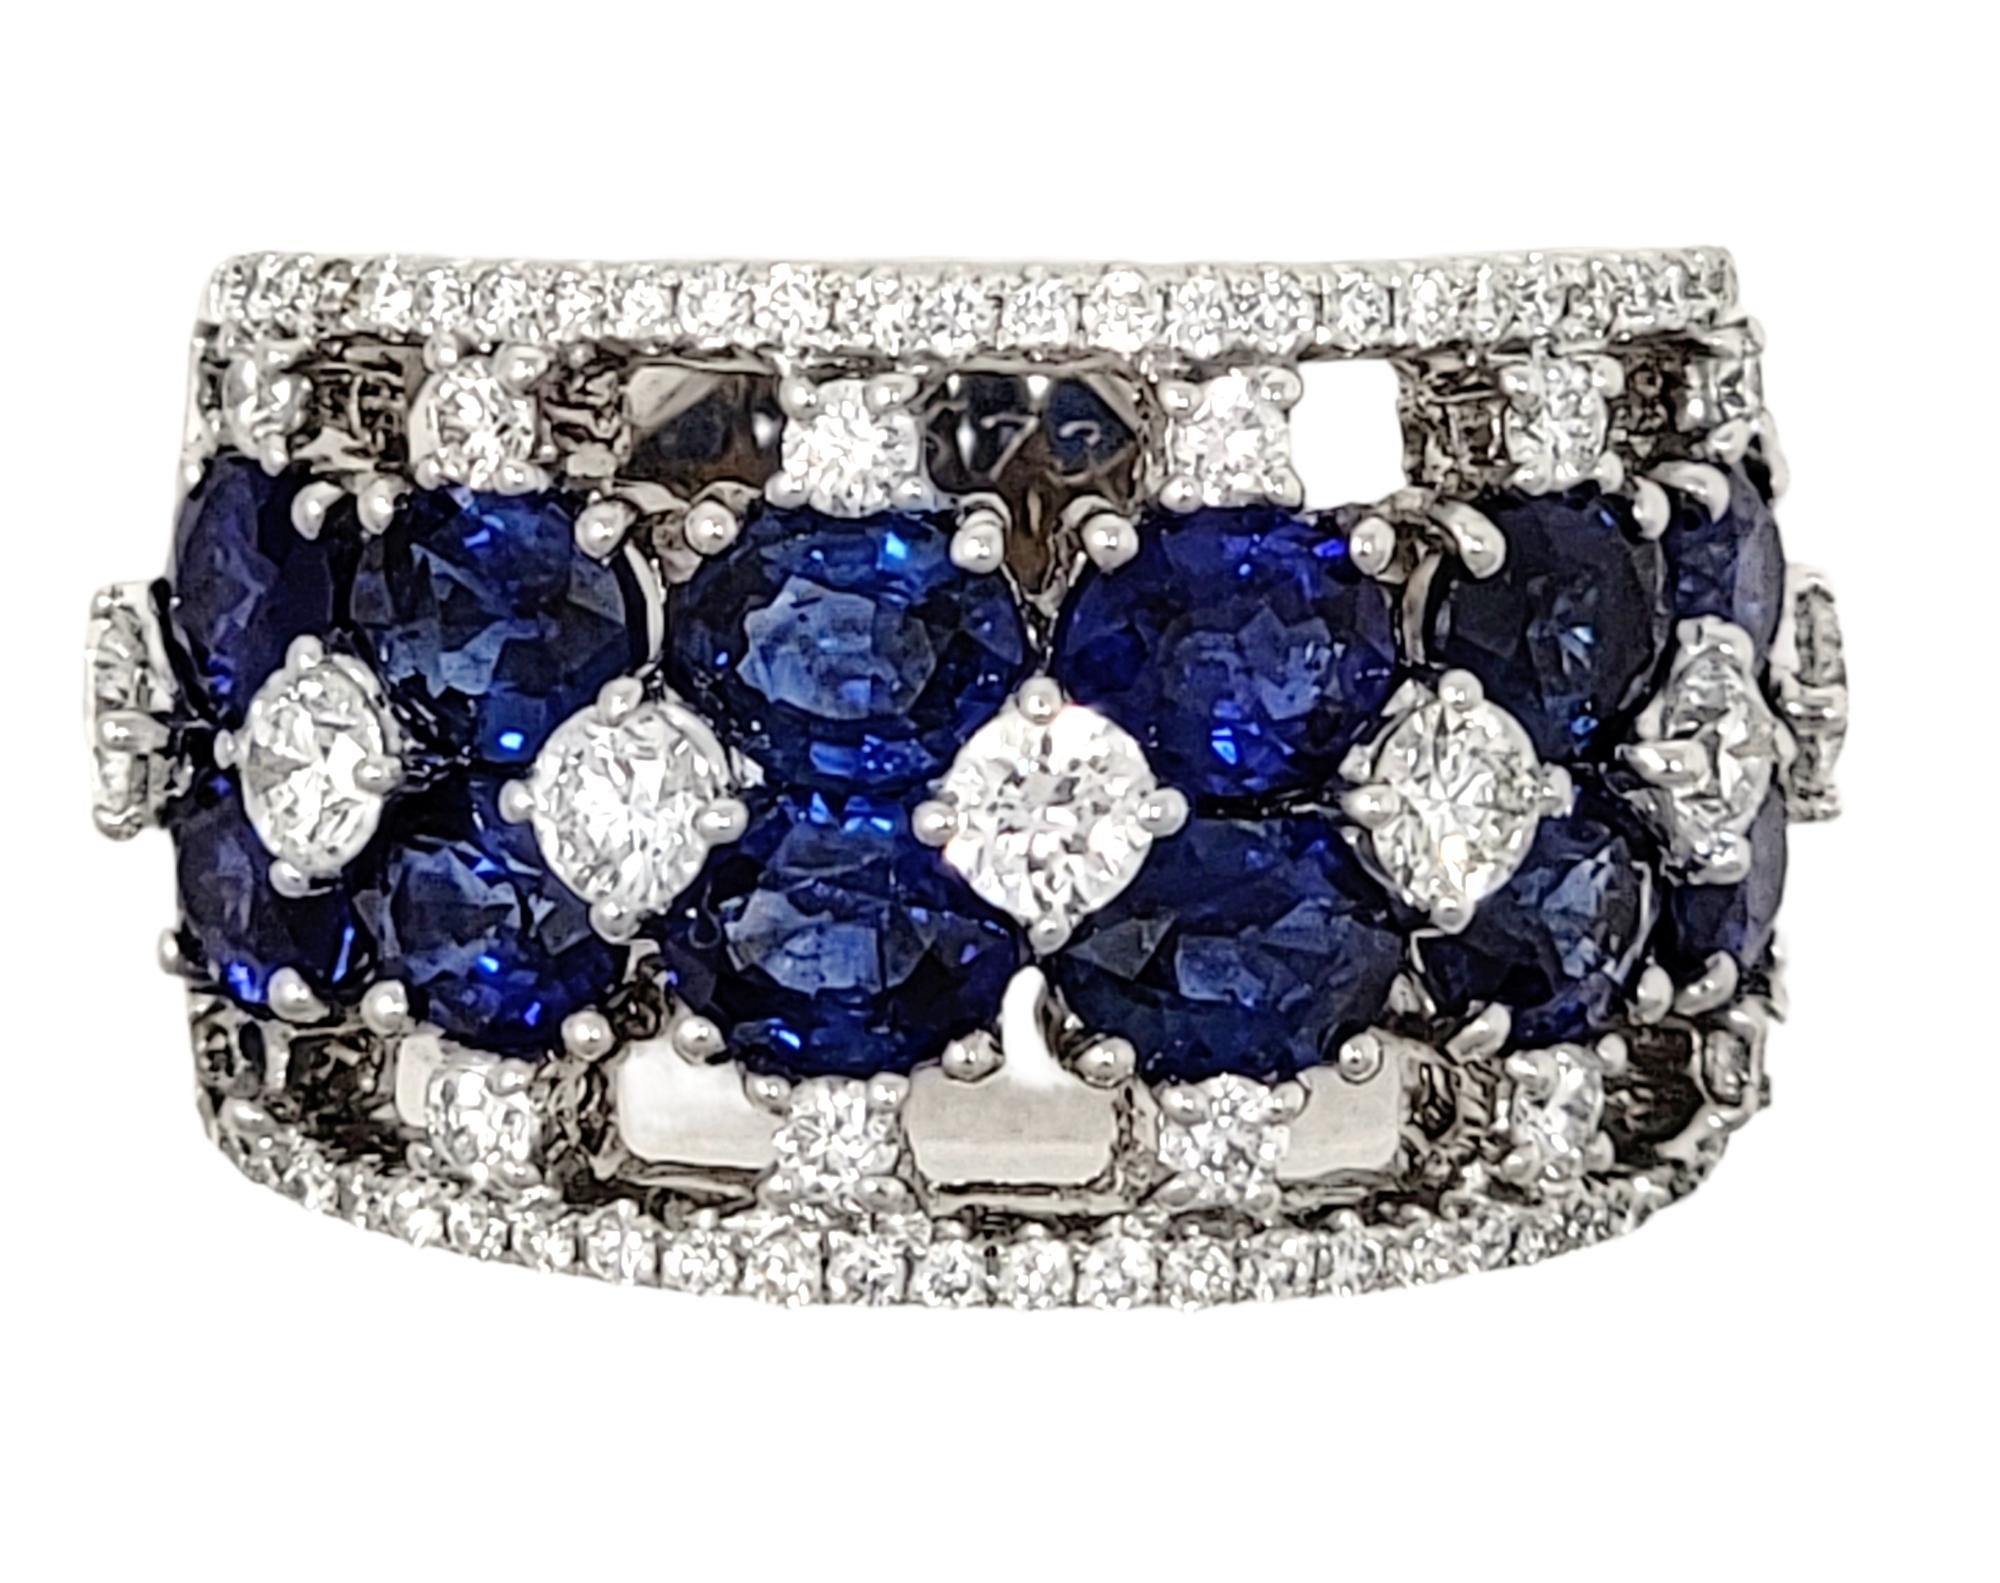 Ring size: 6.5

Stunningly sparkly sapphire and diamond band ring will fill your finger with undeniable beauty. This amazing piece is filled with dazzling white diamonds and sparkling blue sapphires set in several rows throughout the piece. The wide